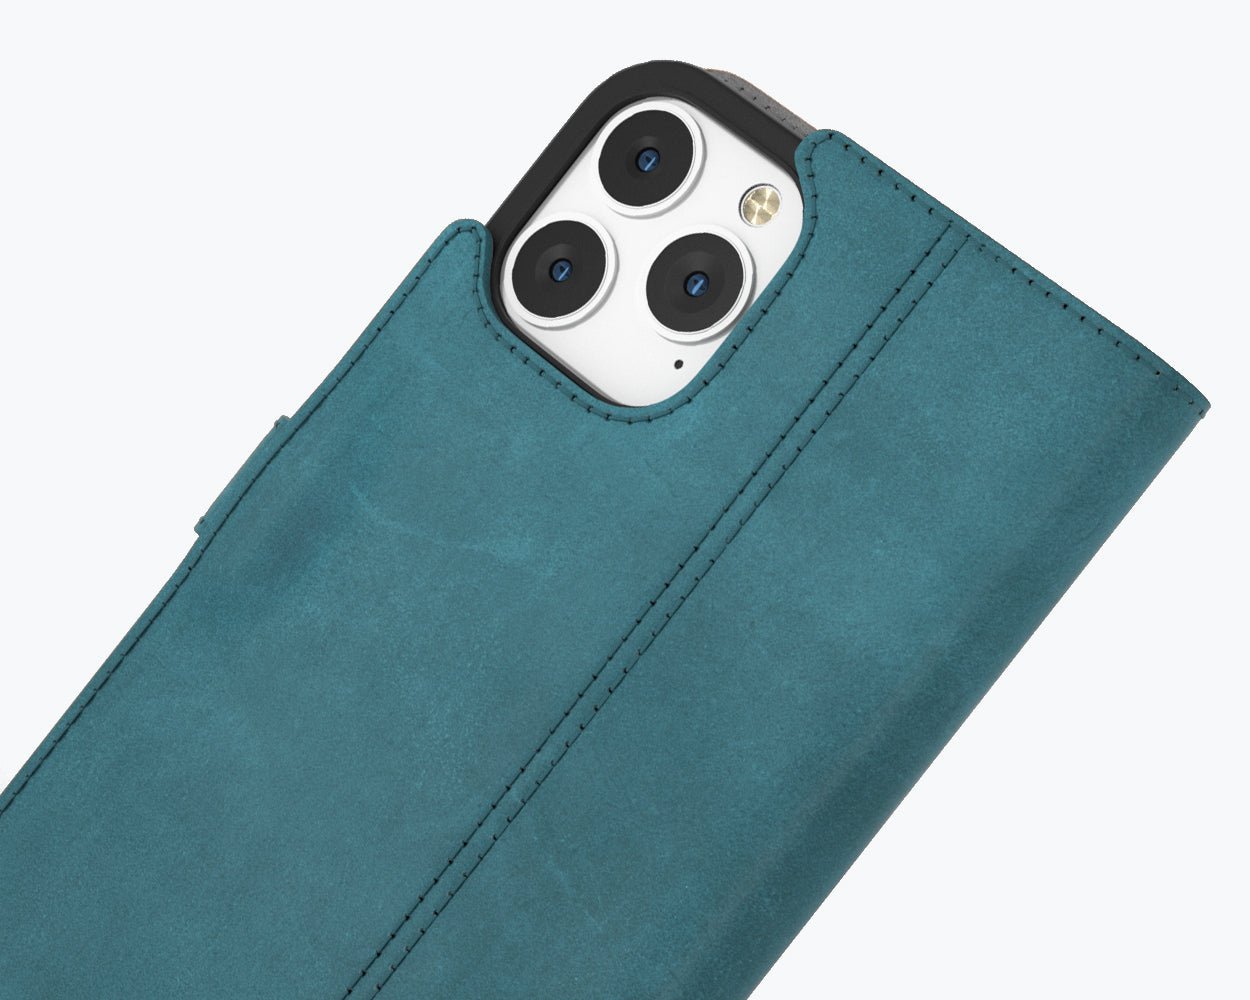 Apple iPhone 13 Pro Max - Vintage Leather Wallet Teal Apple iPhone 13 Pro Max - Snakehive UK